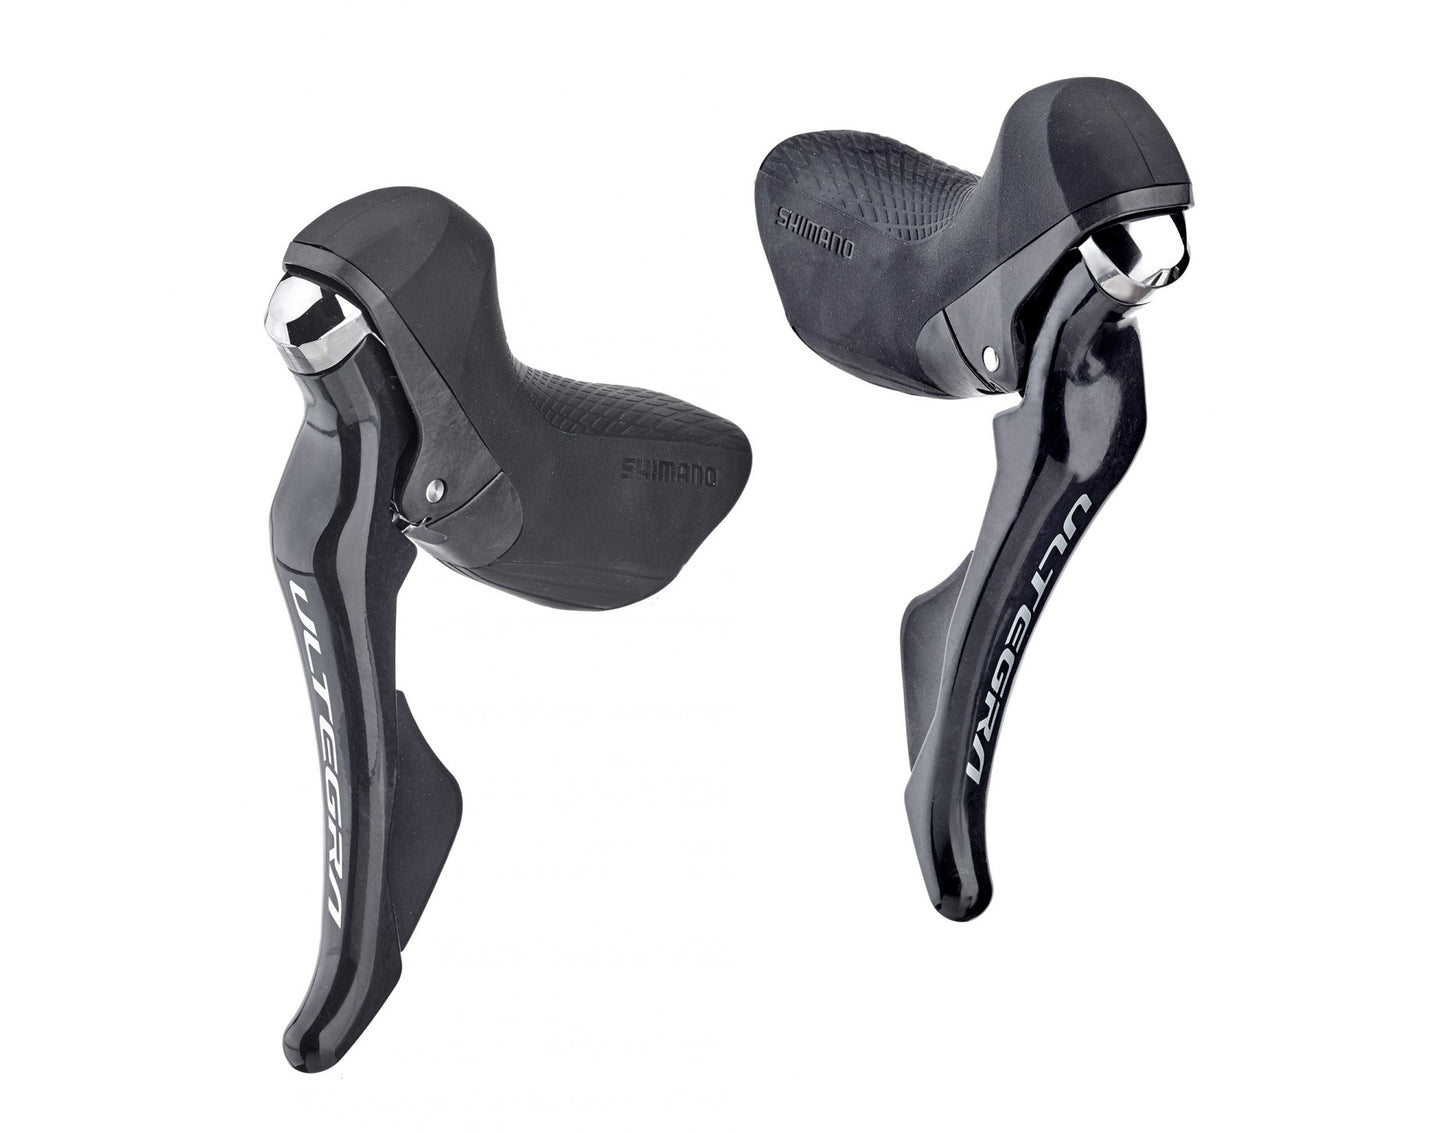 Shimano Ultegra ST R8000 Left and Right Shifter Set